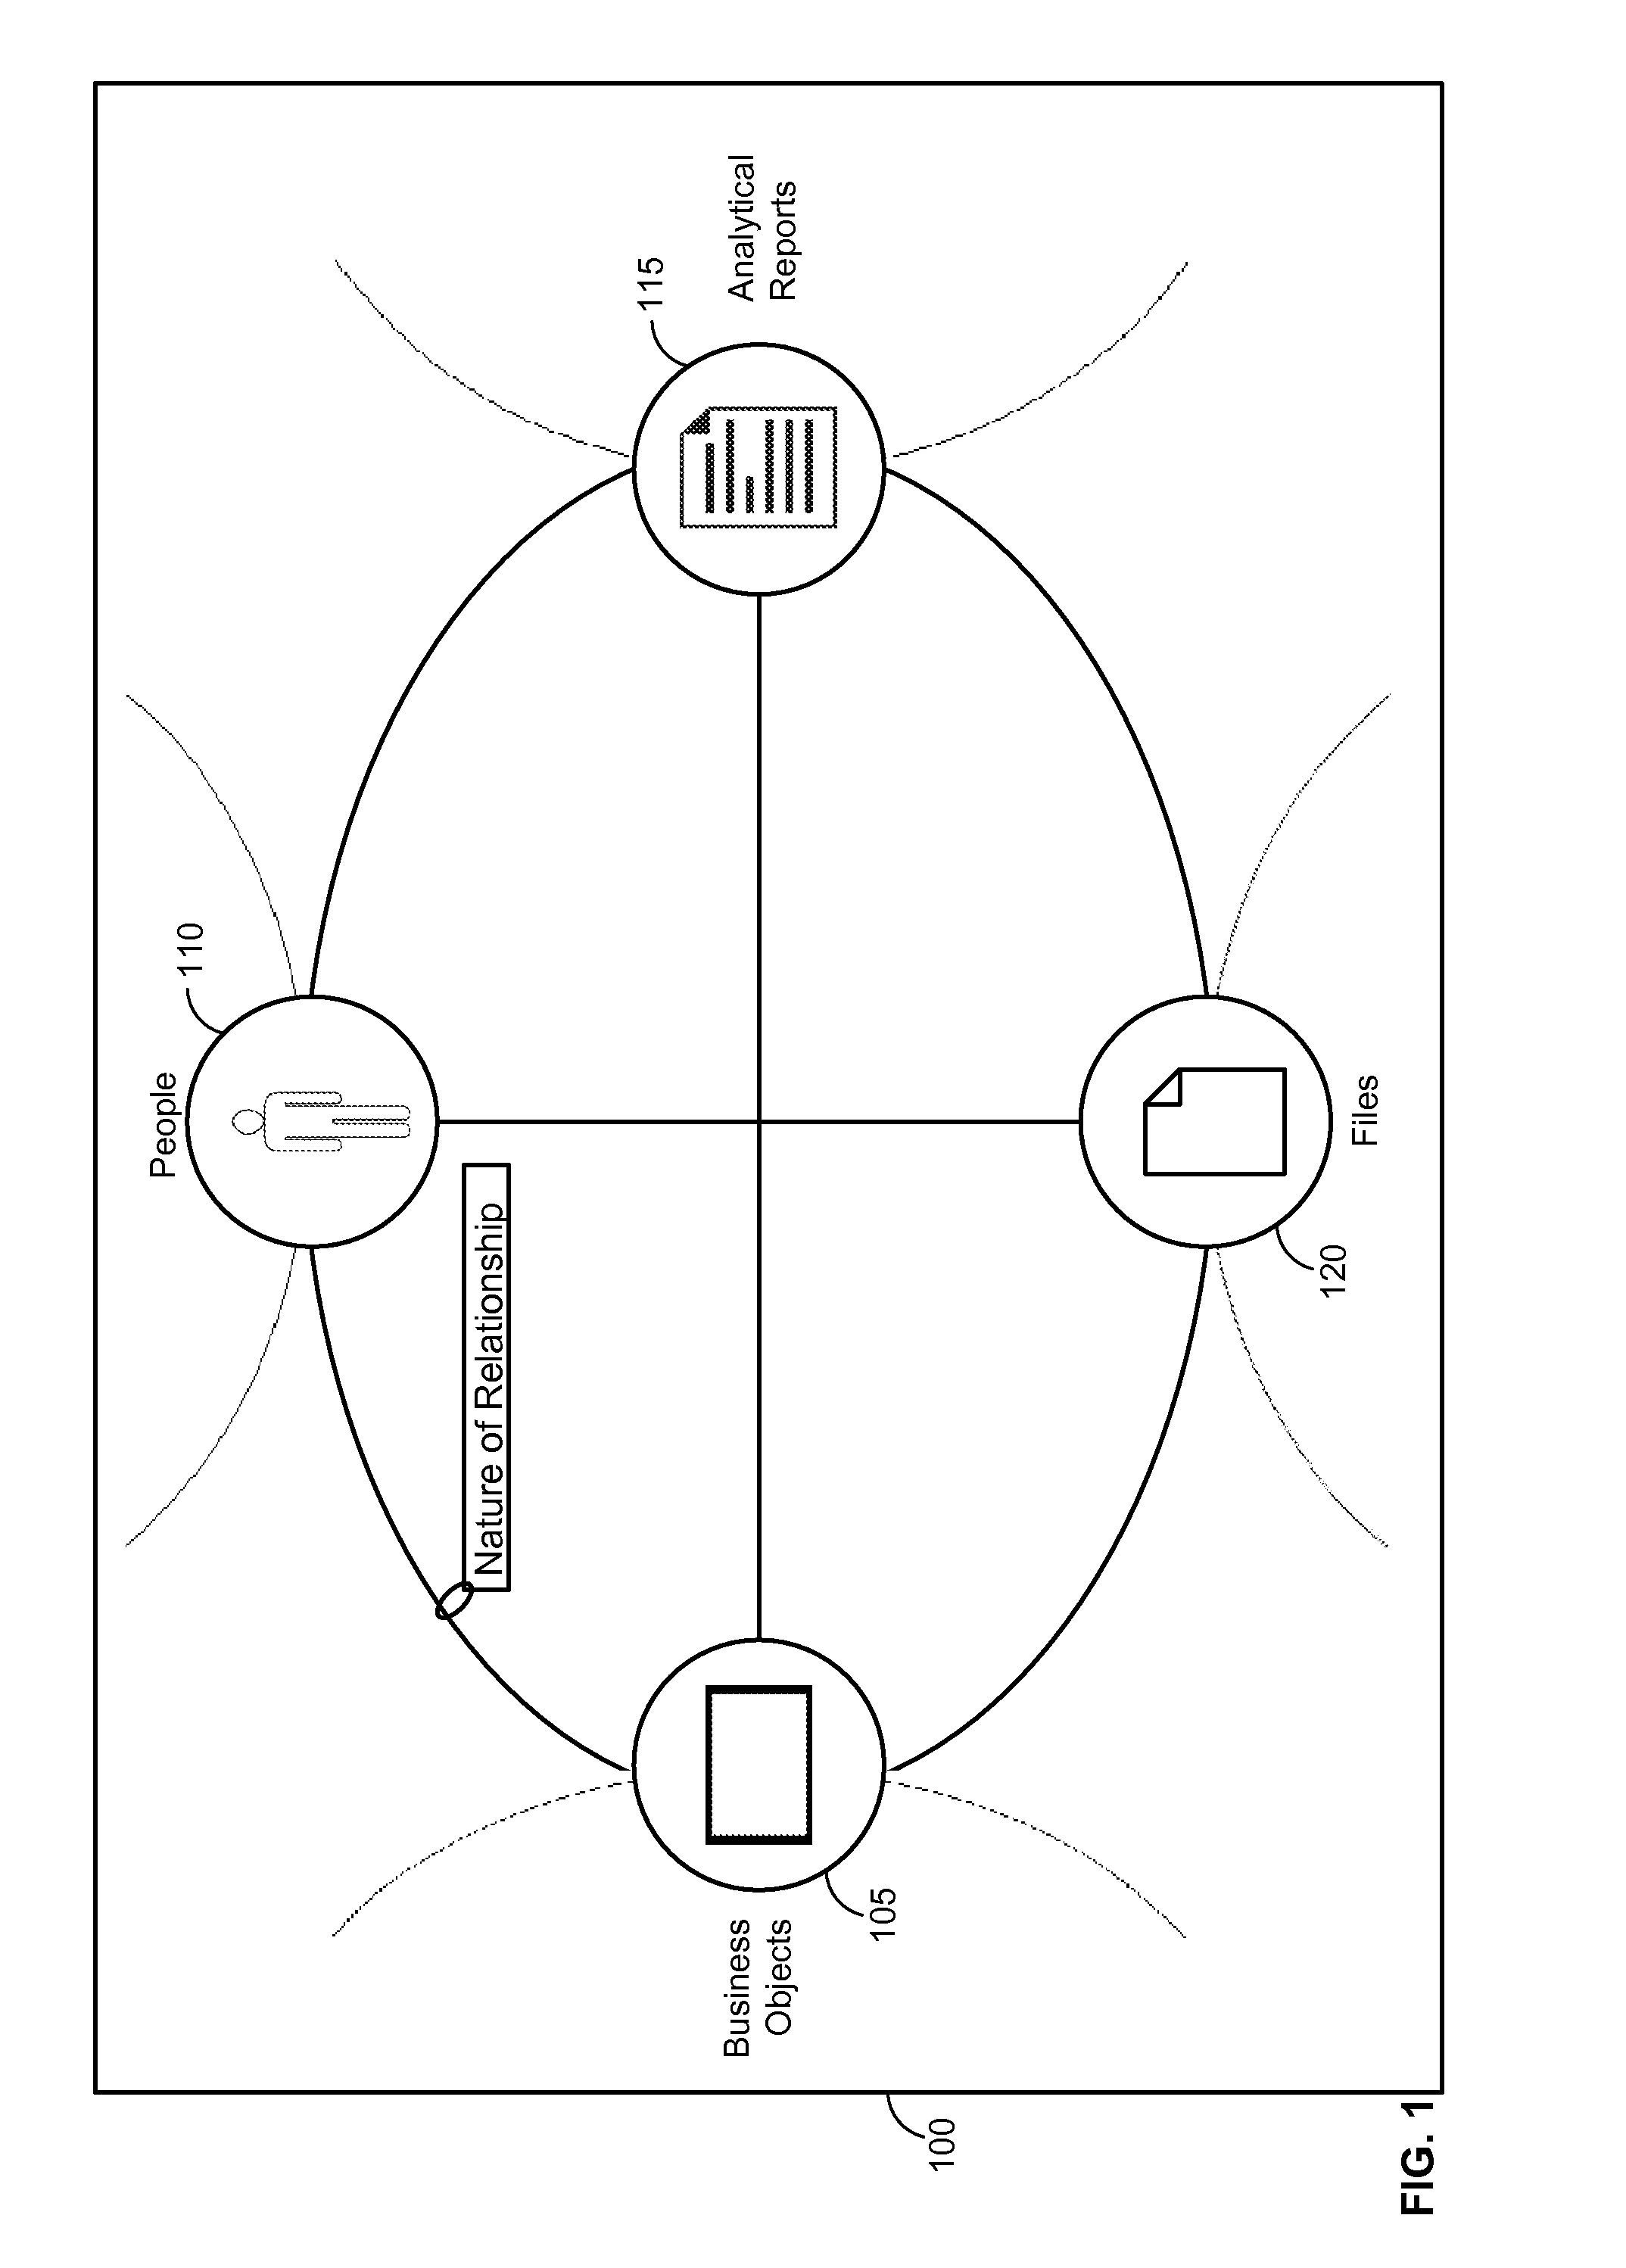 User interface for displaying and navigating relationships between objects graphically